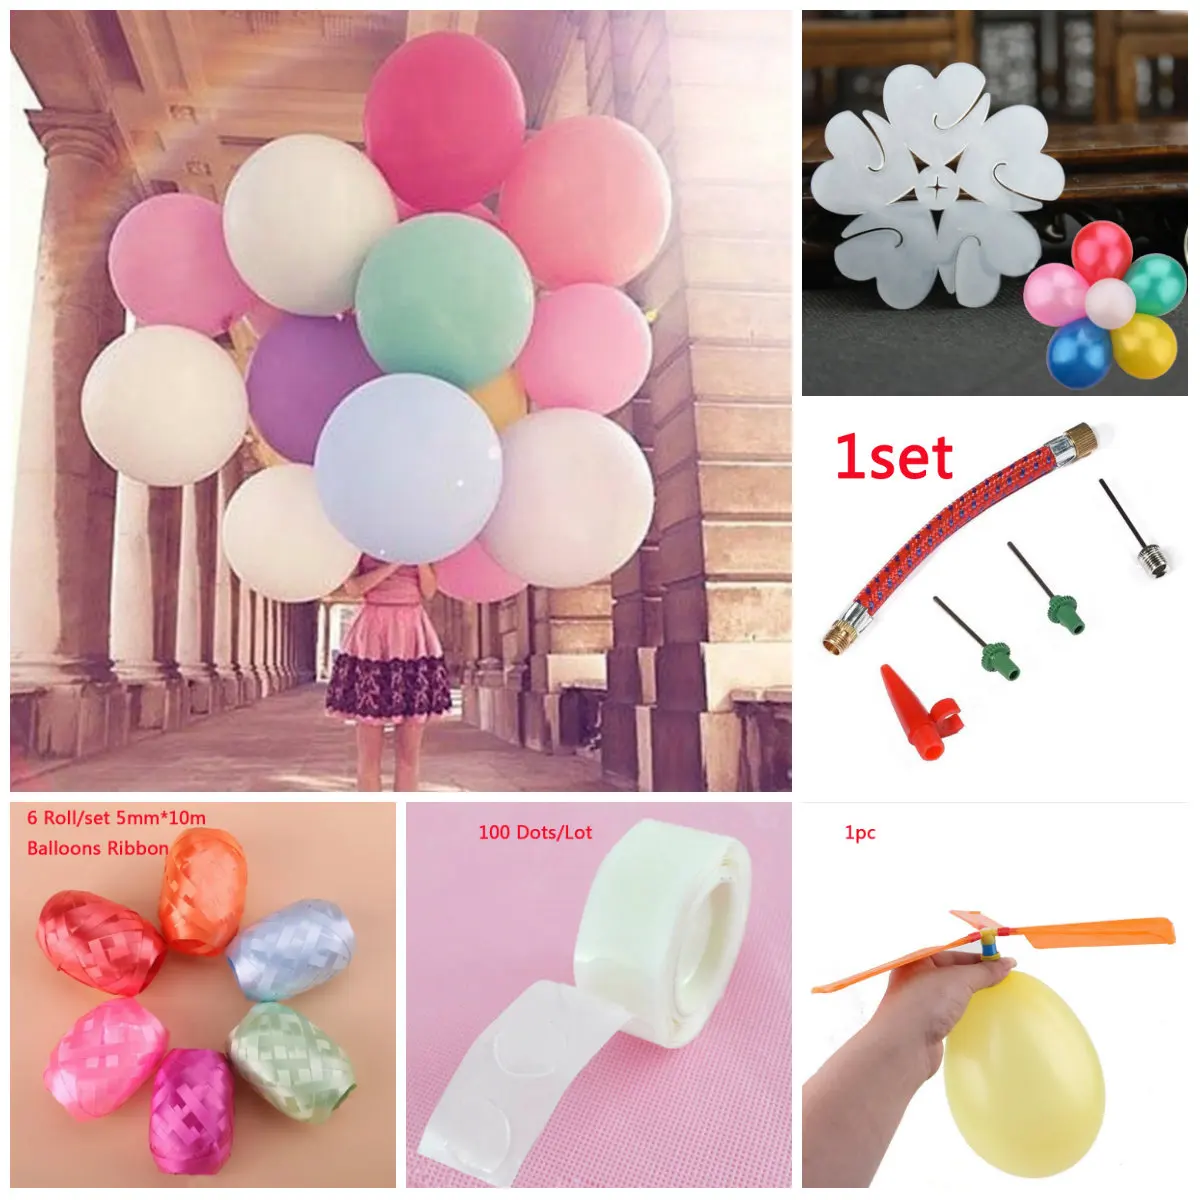 

1PC Hot Sale Colorful 36" Giant Big Balloon 36 inch Latex Birthday Wedding Party Helium Decoration and balloon accessries